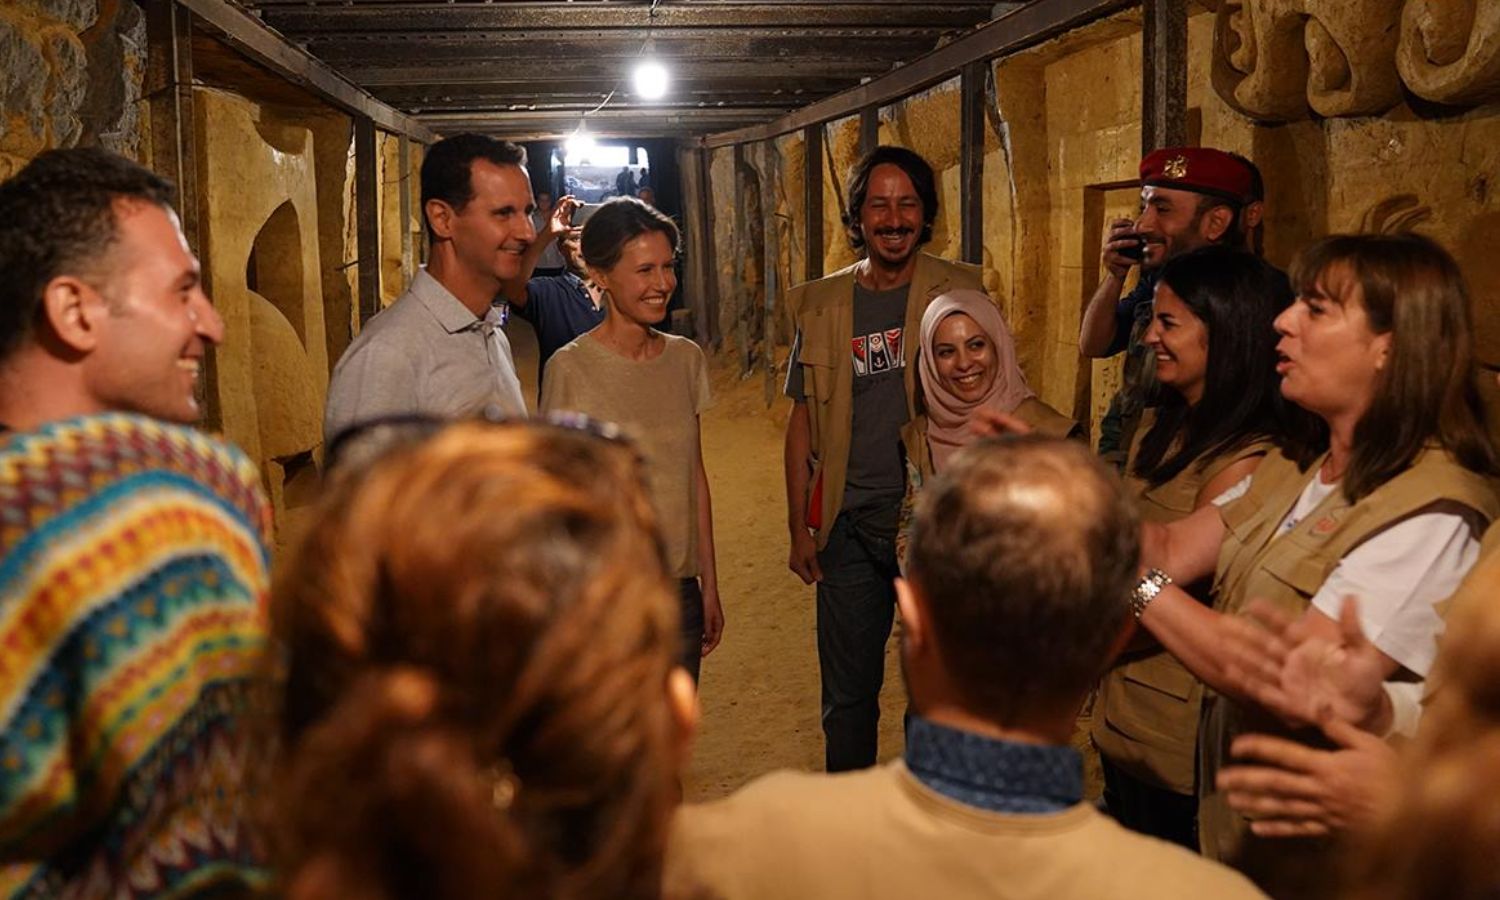 Syrian President Bashar al-Assad and his wife visit a military tunnel in Jobar - August 16, 2018 (Syrian Presidency/Facebook)